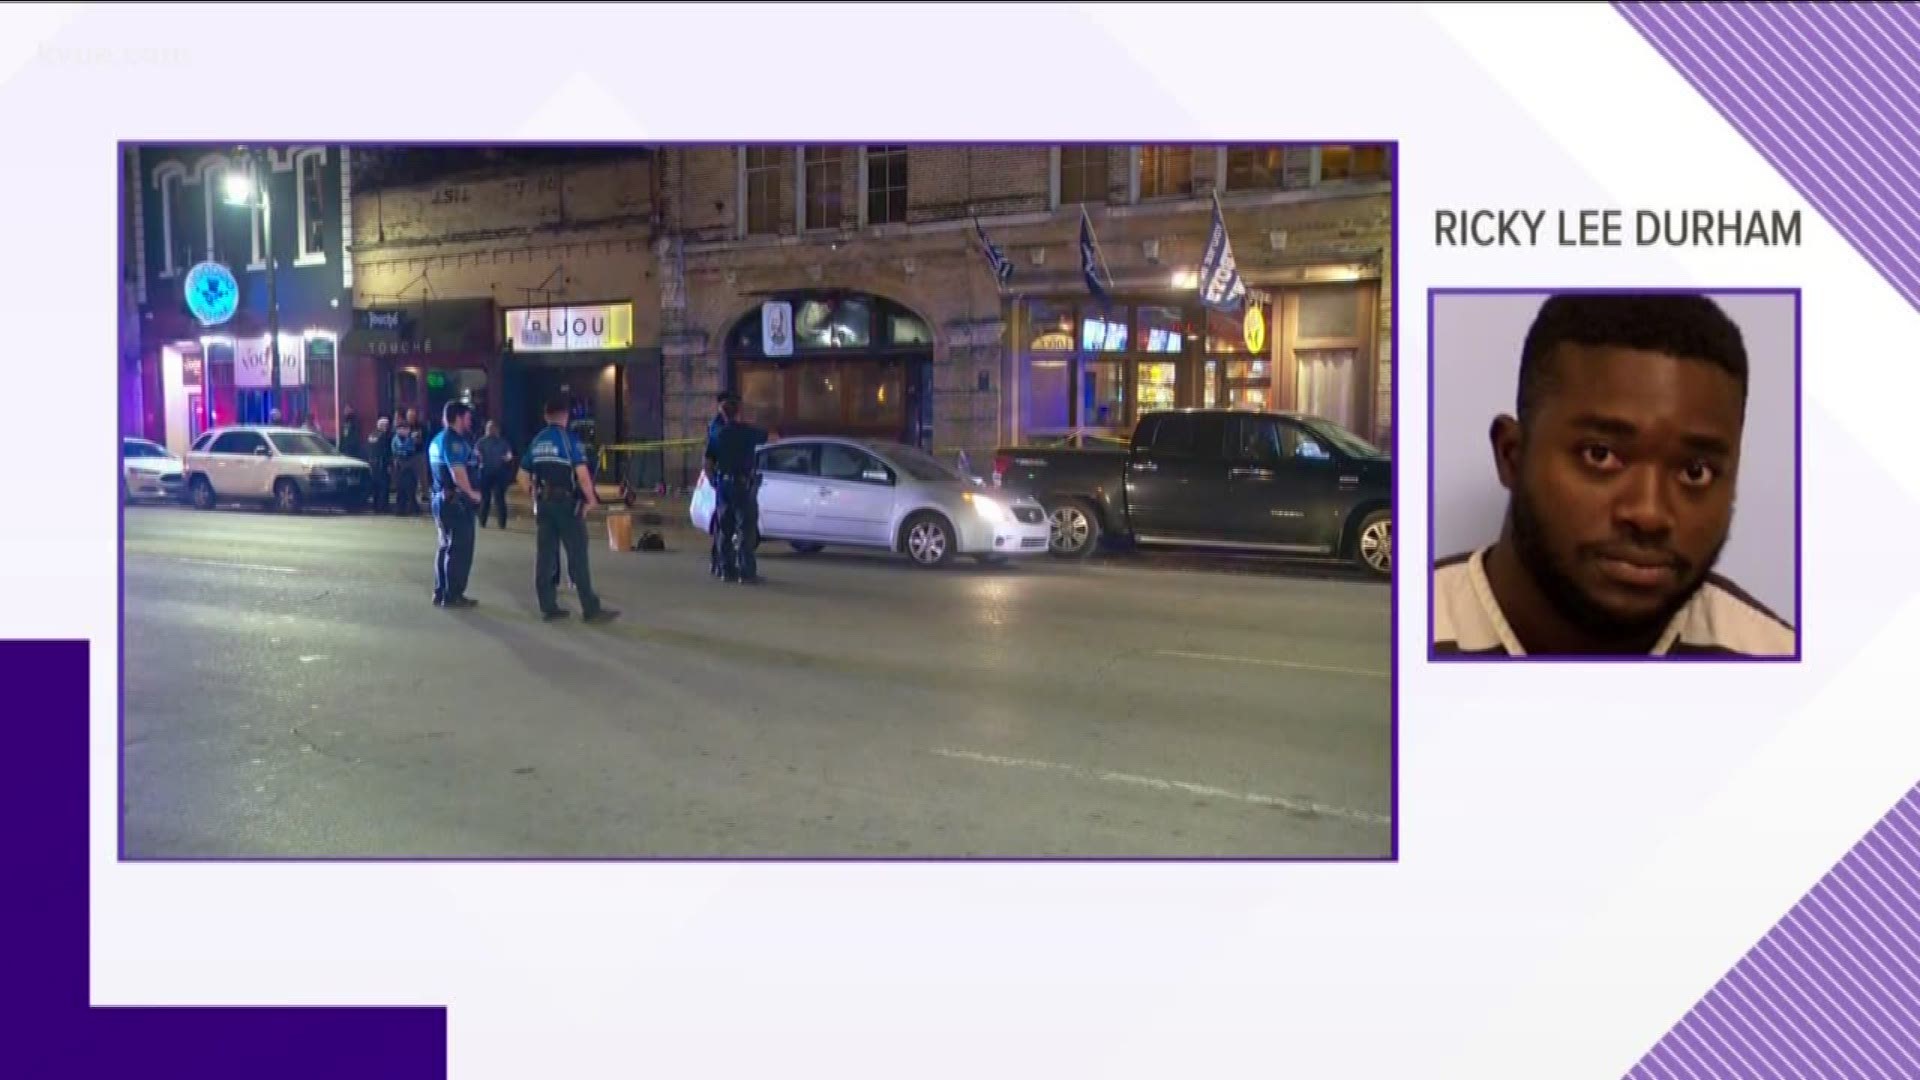 Police said Ricky Lee Durham was kicked out of the bar but came back with a rifle.